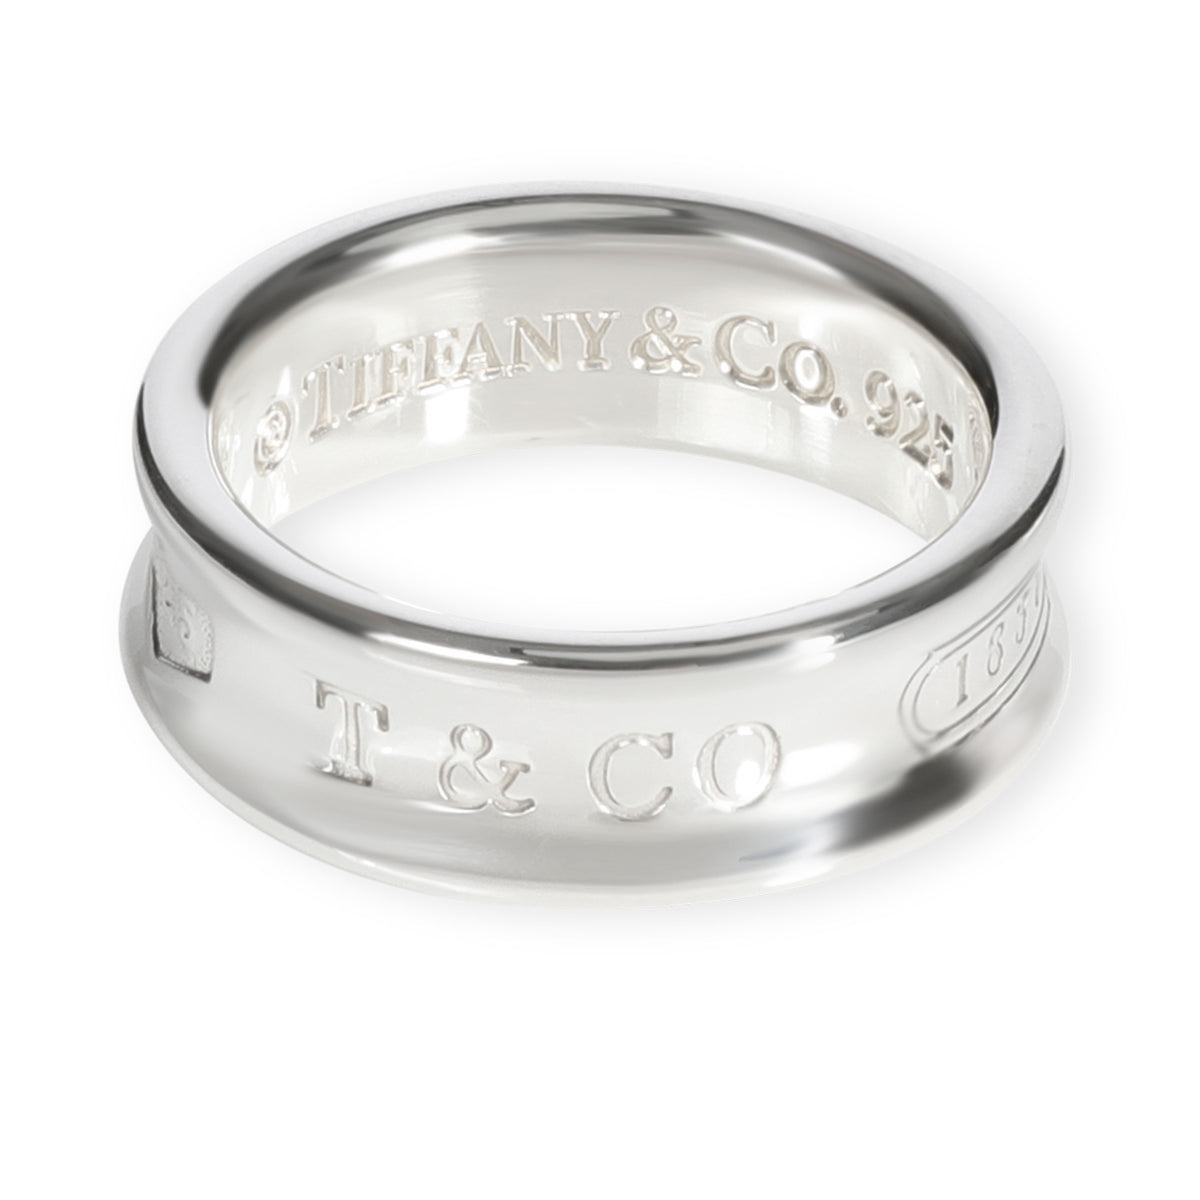 Tiffany & Co. 1837 Ring in  Sterling Silver